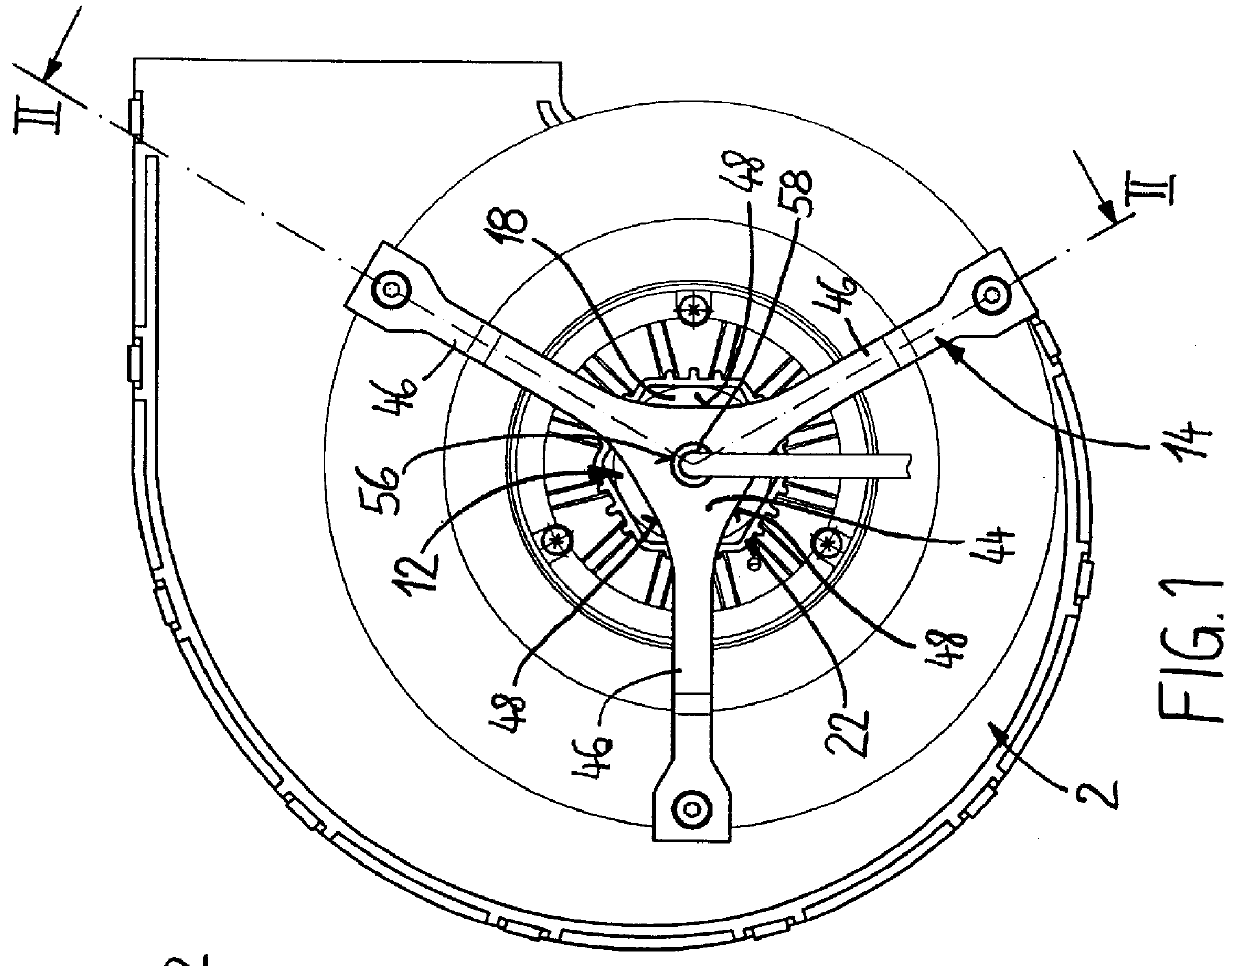 Arrangement for the vibration-isolating suspension of an electric motor